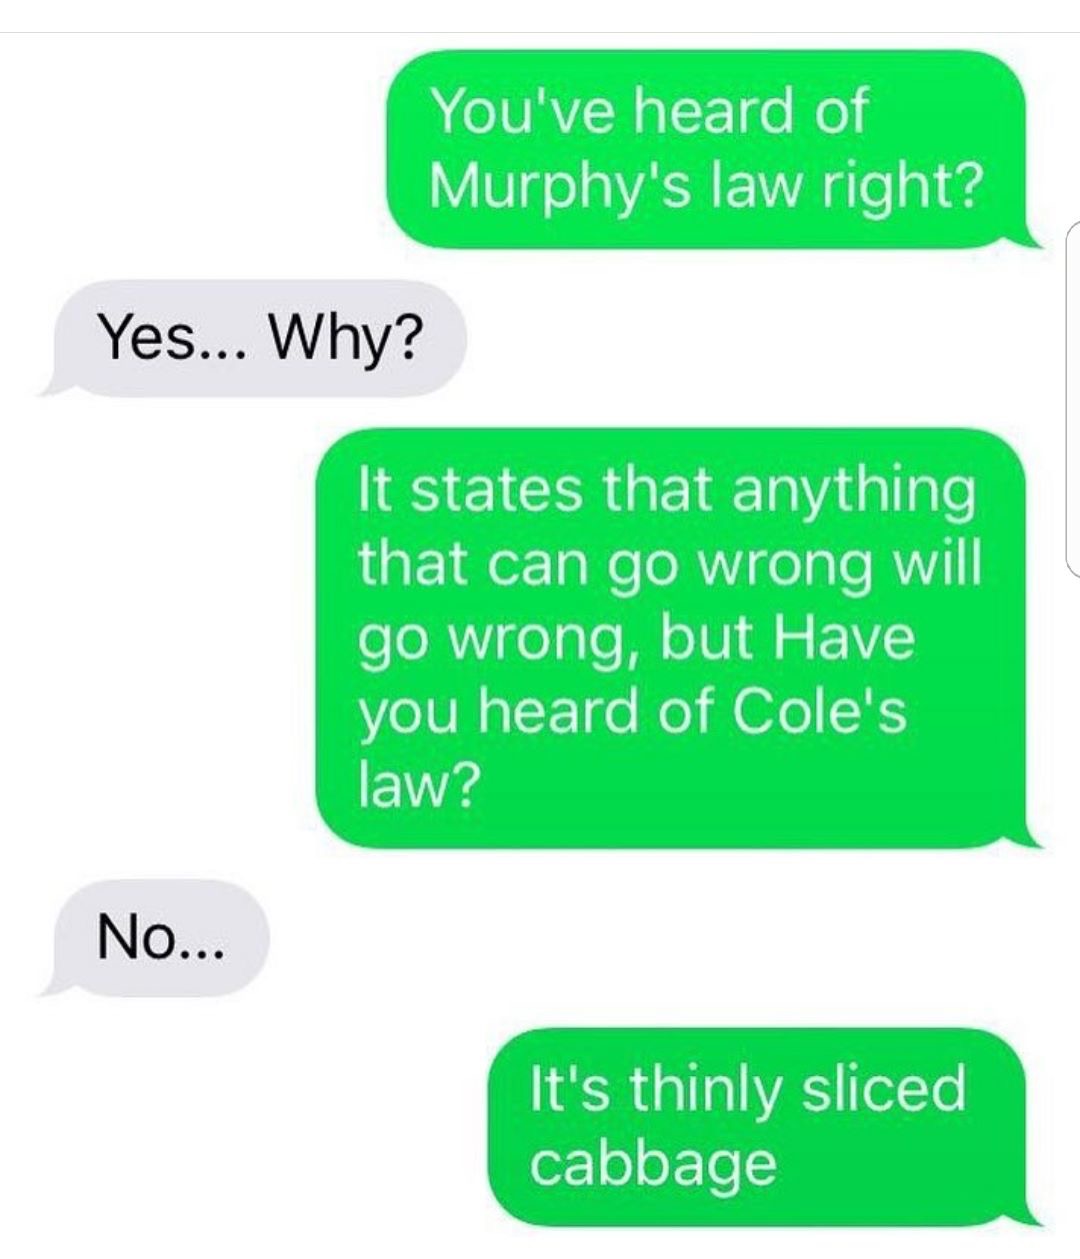 grass - You've heard of Murphy's law right? Yes... Why? It states that anything that can go wrong will go wrong, but Have you heard of Cole's law? No... It's thinly sliced cabbage